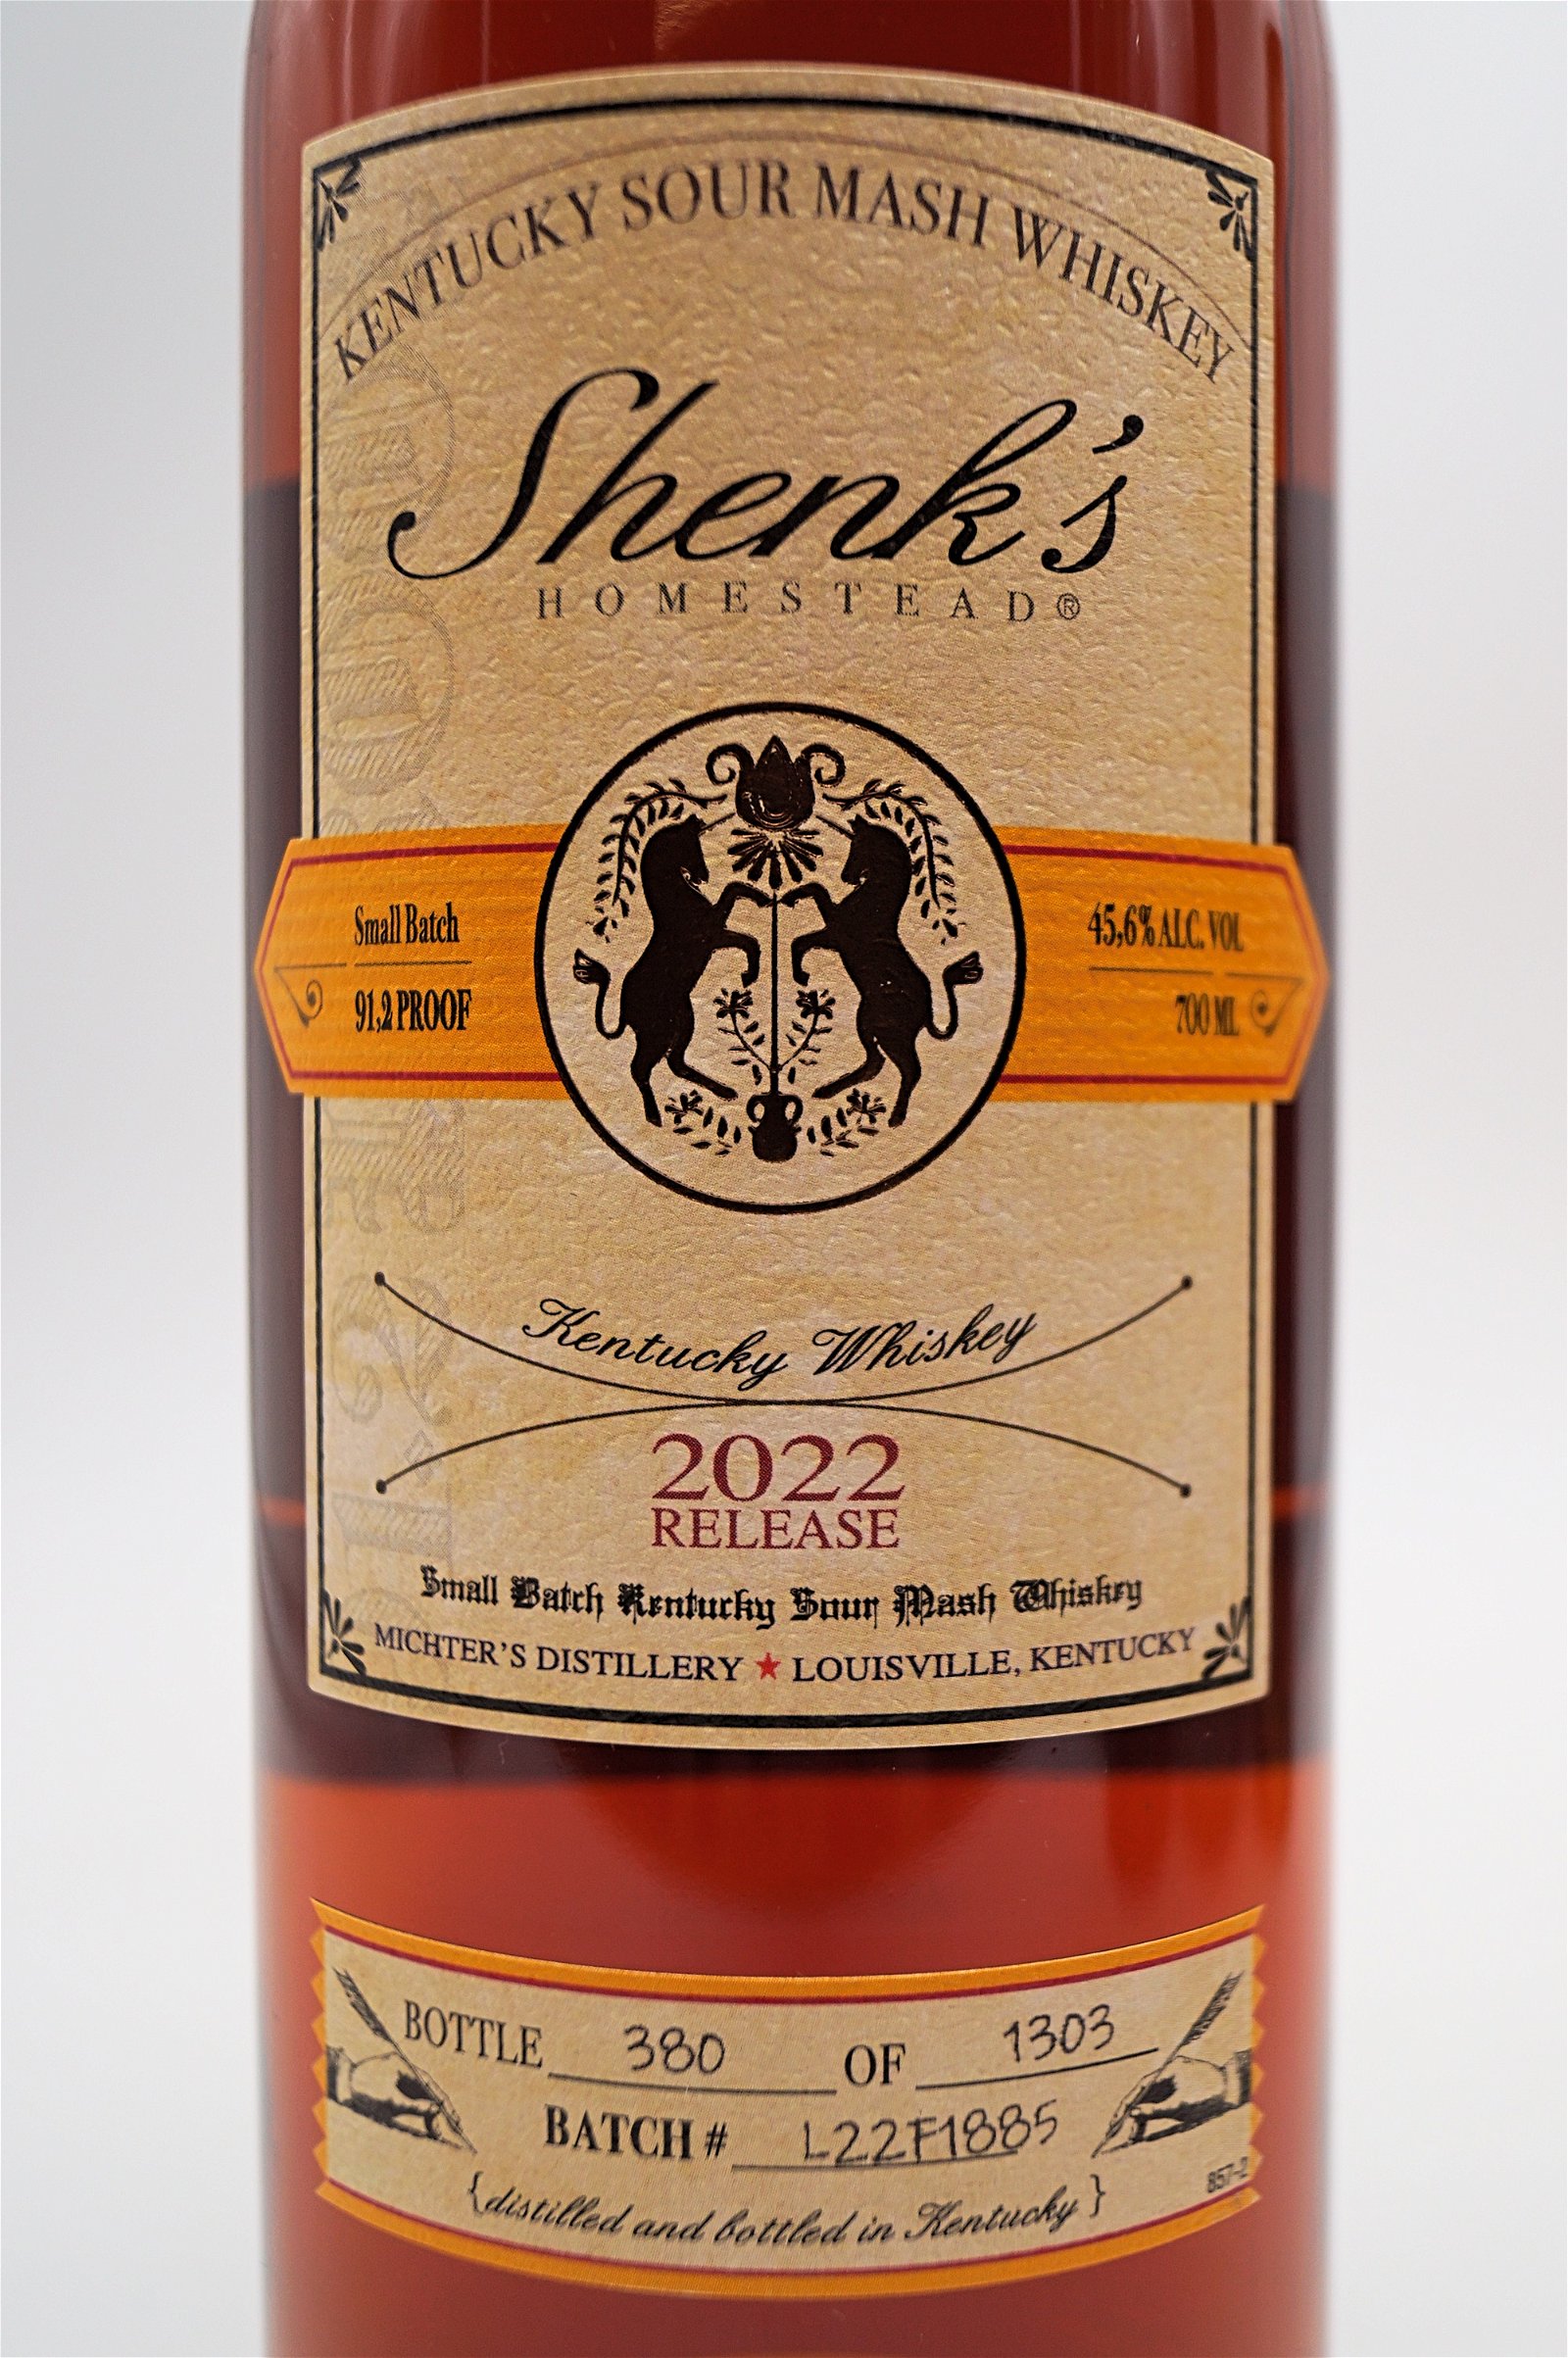 Michters L. R. Shenks Homestead Sour Mash Whiskey